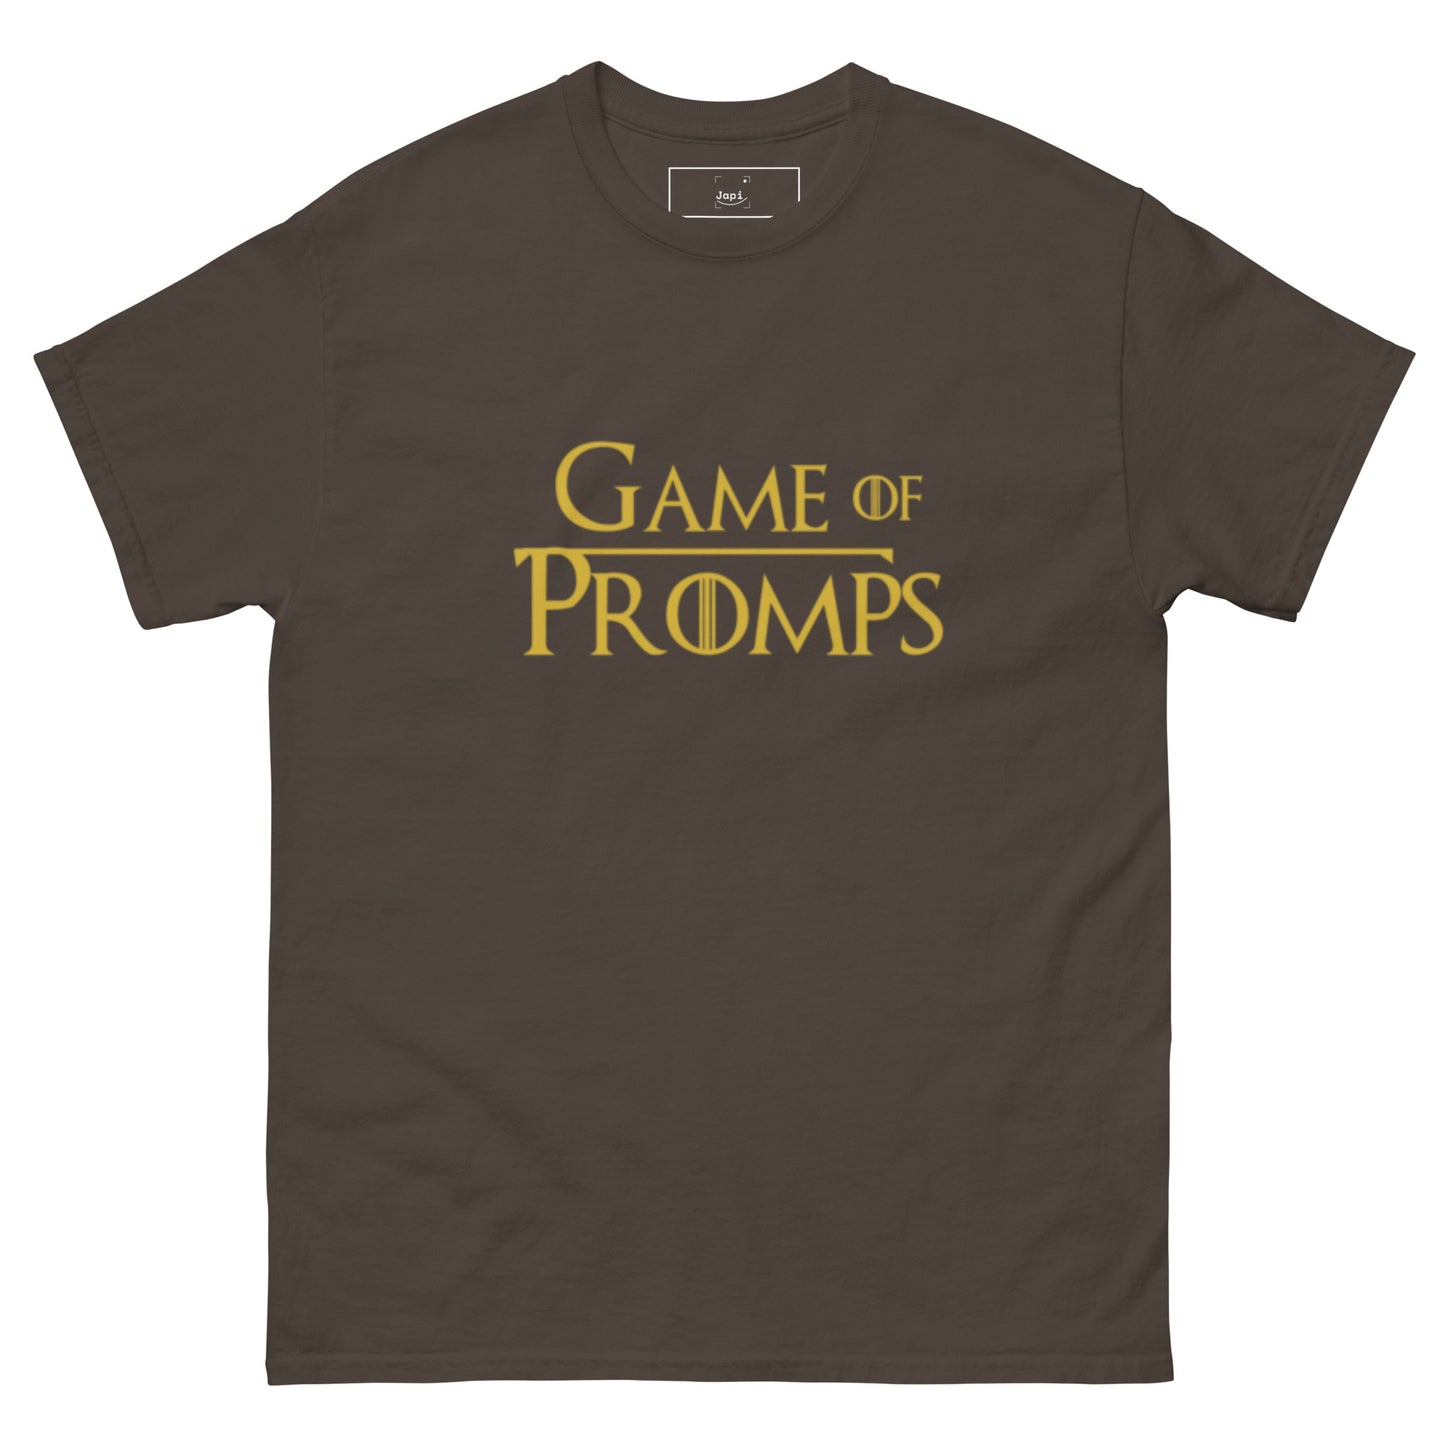 "Game of Prompts" T-shirt